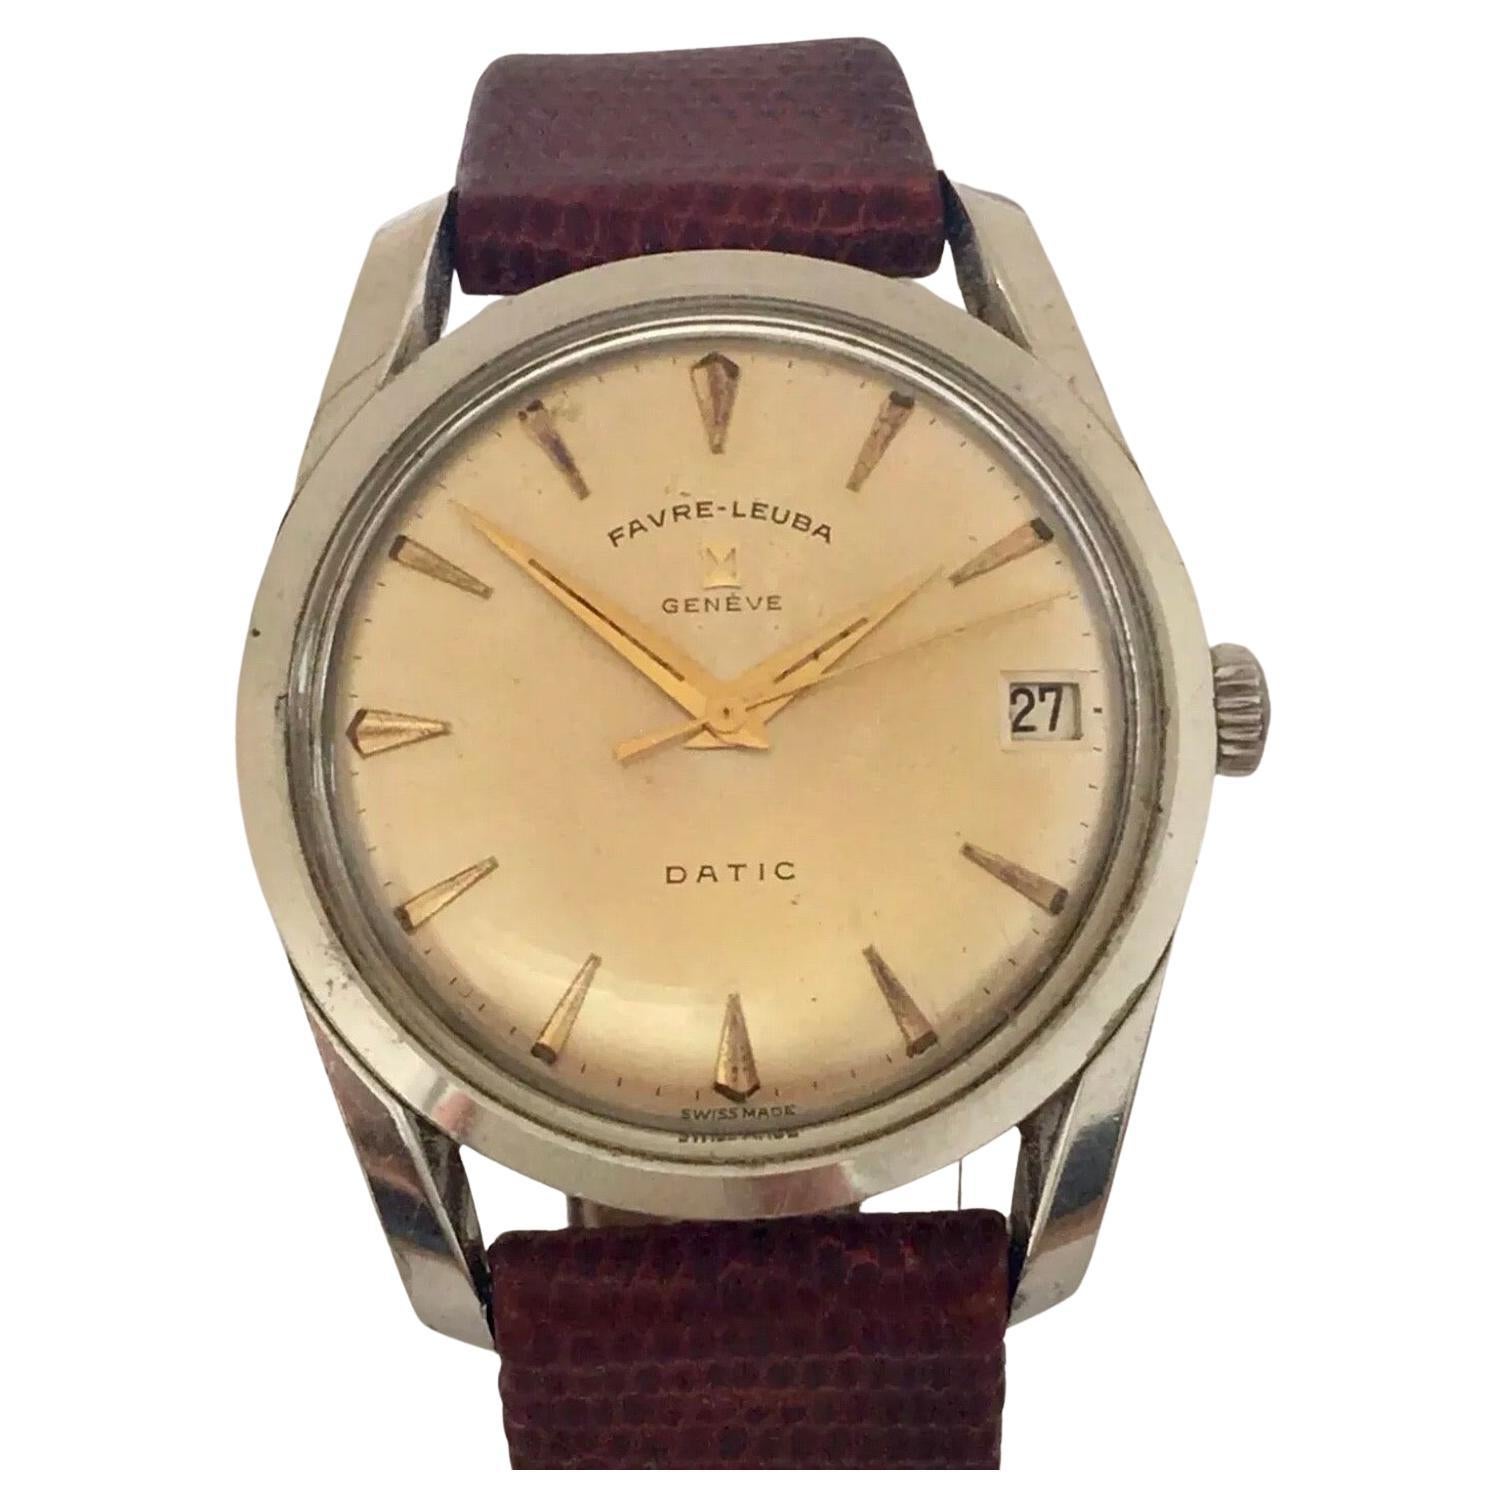 Vintage 1960’s Stainless Steel Favre-Leuba Geneve Datic Watch For Sale